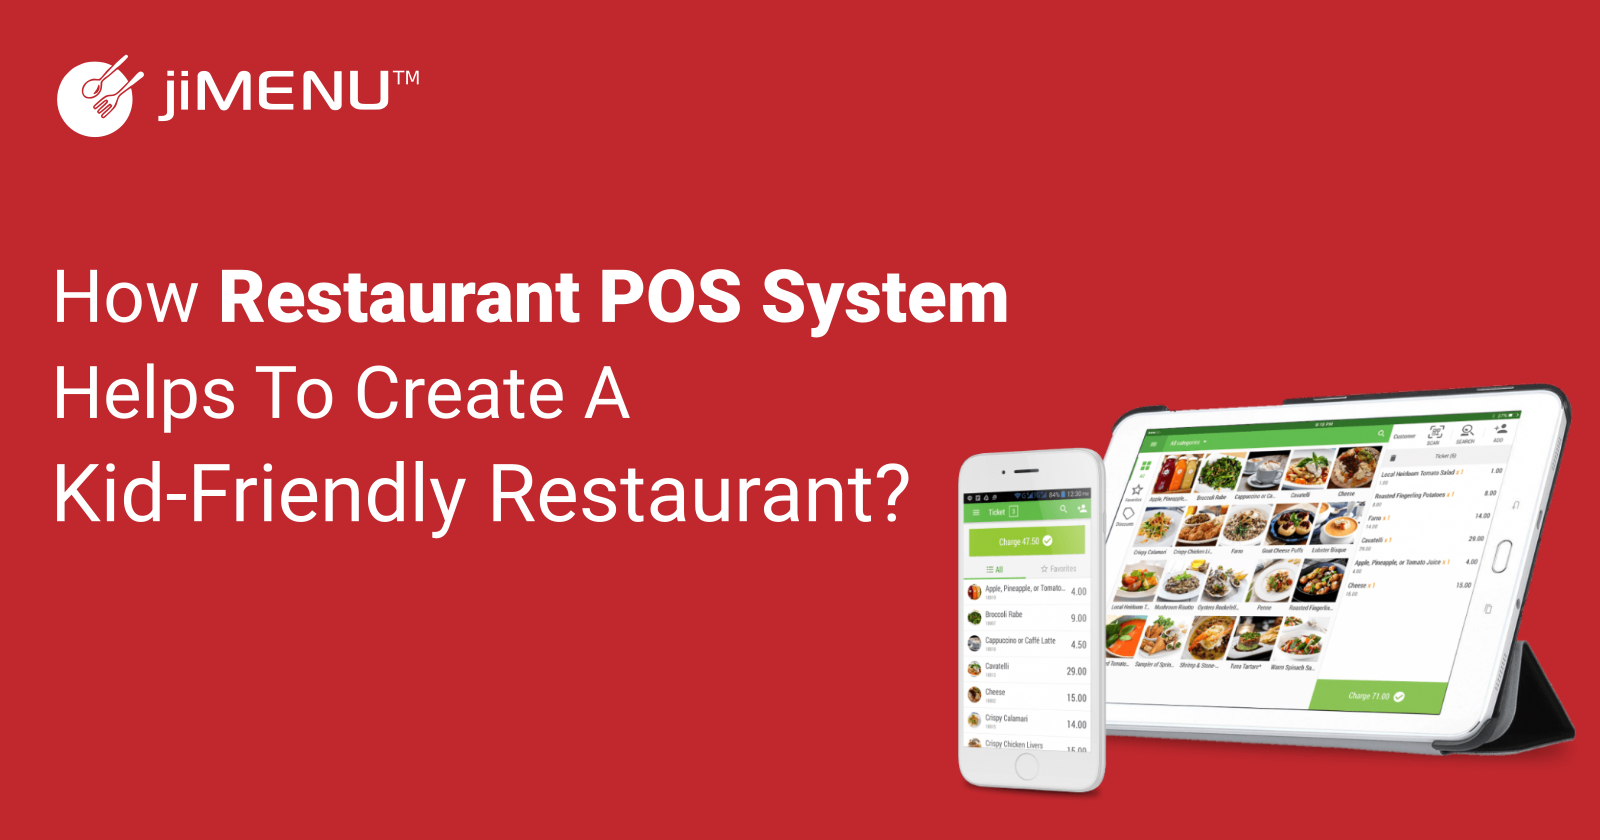 How Restaurant POS System Helps to Create a Kid-Friendly Restaurant?